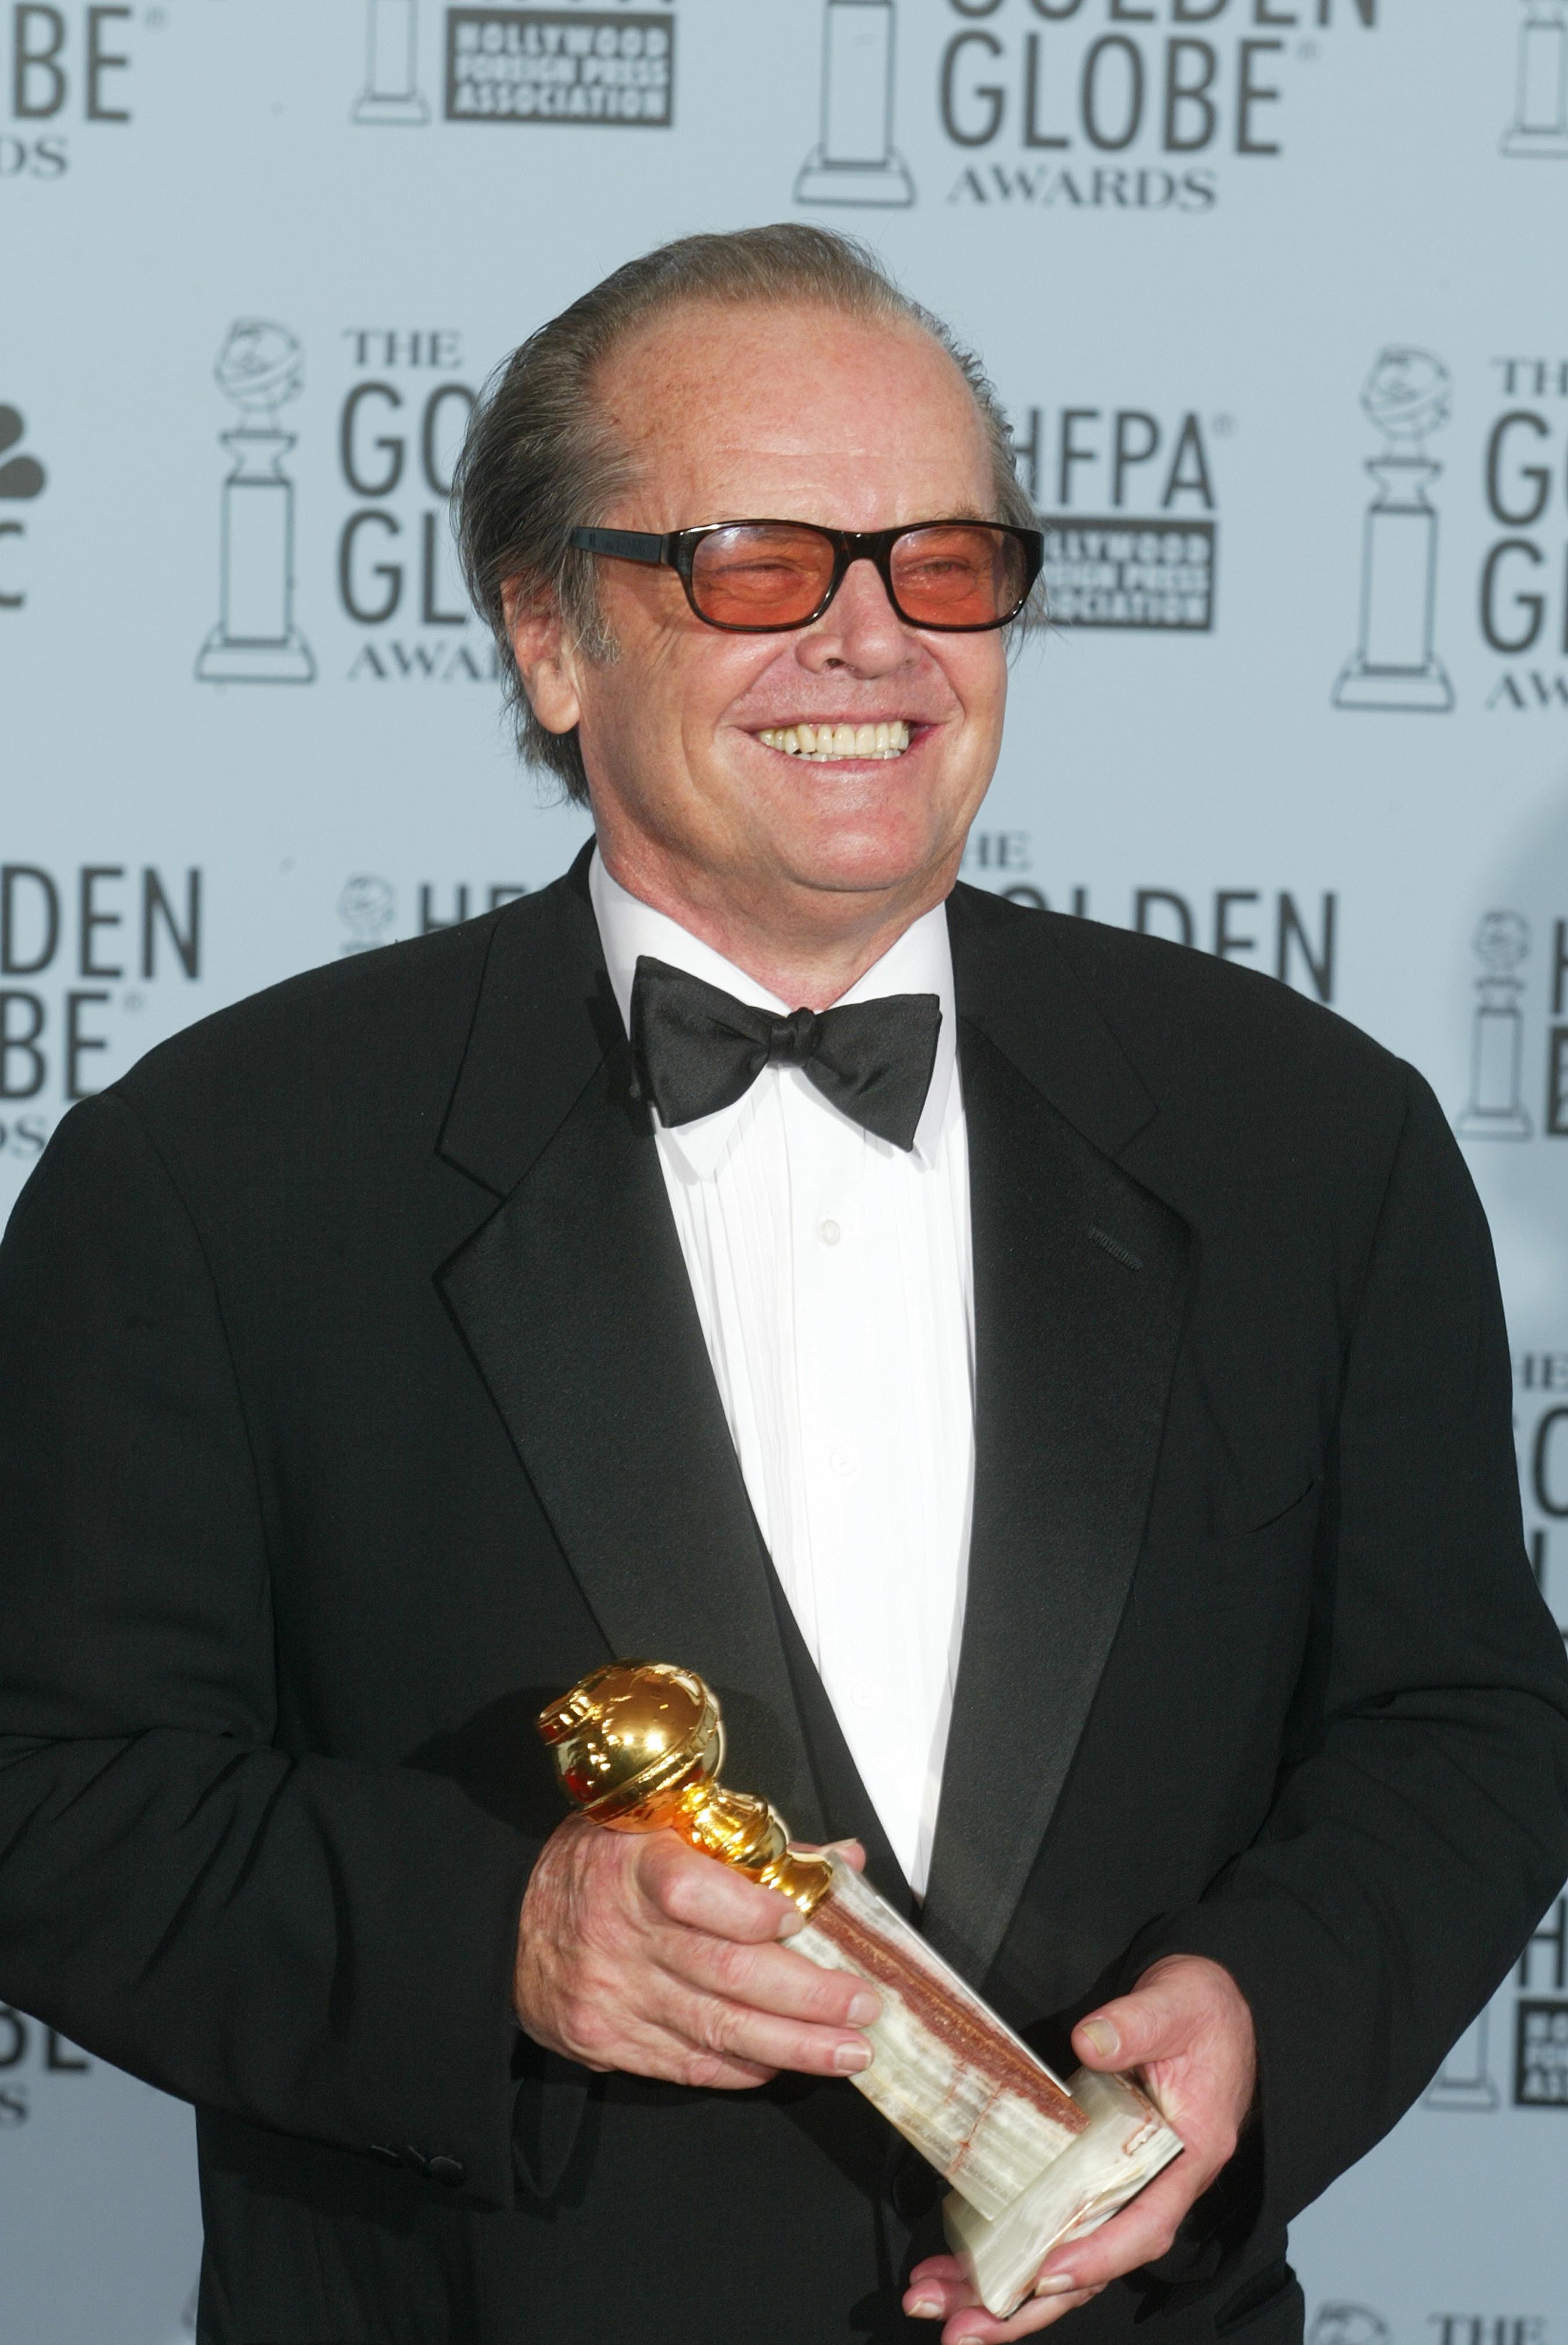 Jack Nicholson with his award at the 60th Annual Golden Globes in 2003. | Photo: Getty Images